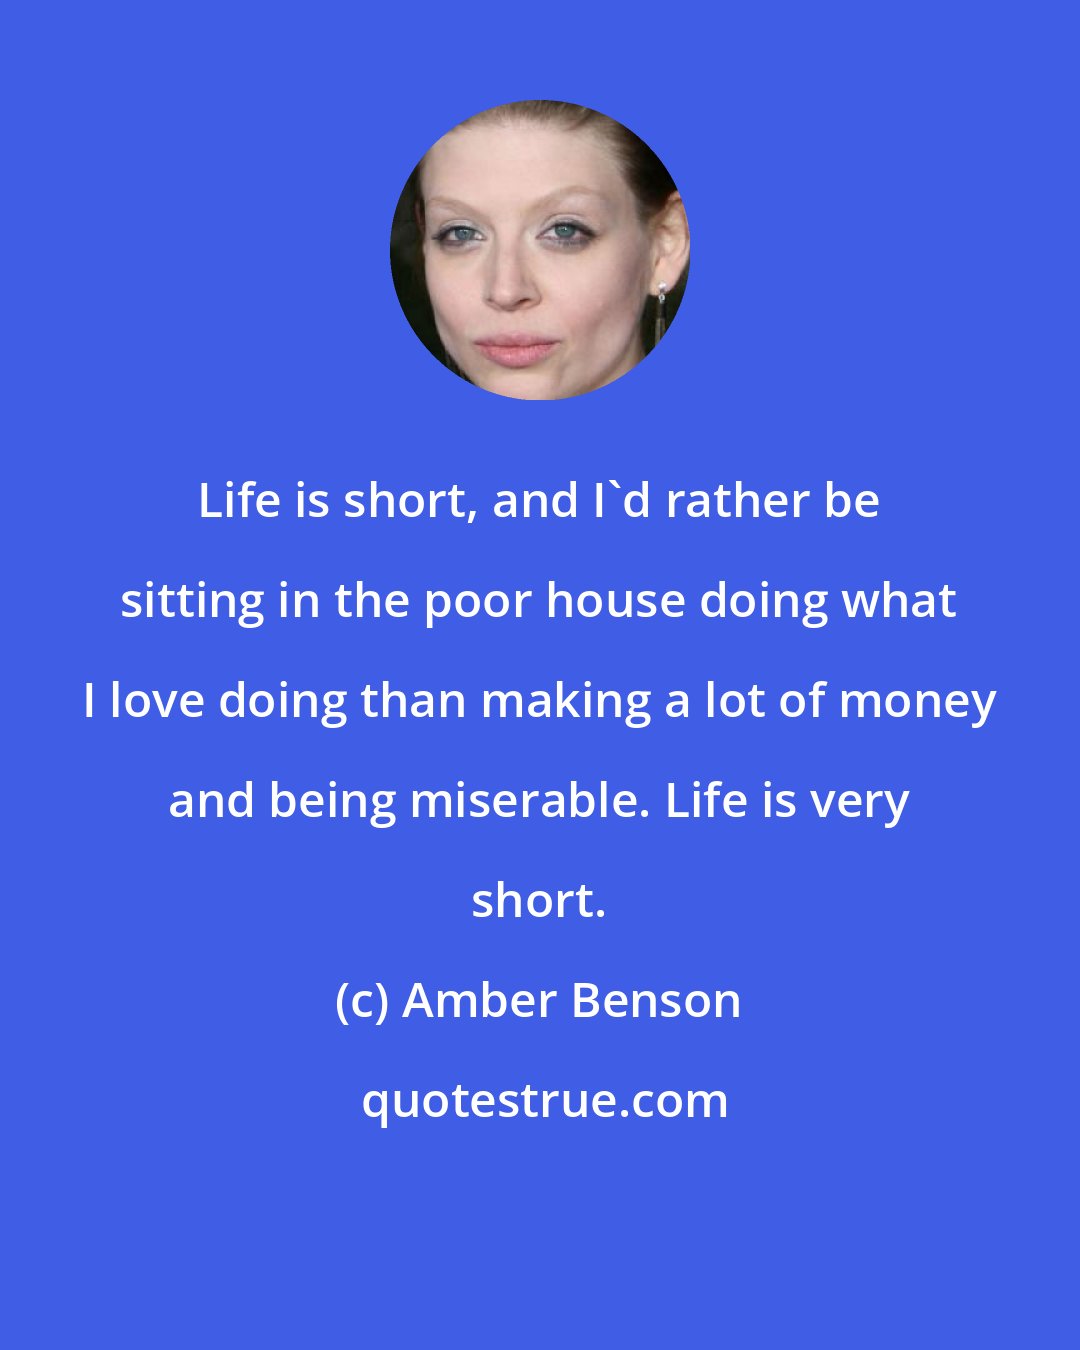 Amber Benson: Life is short, and I'd rather be sitting in the poor house doing what I love doing than making a lot of money and being miserable. Life is very short.